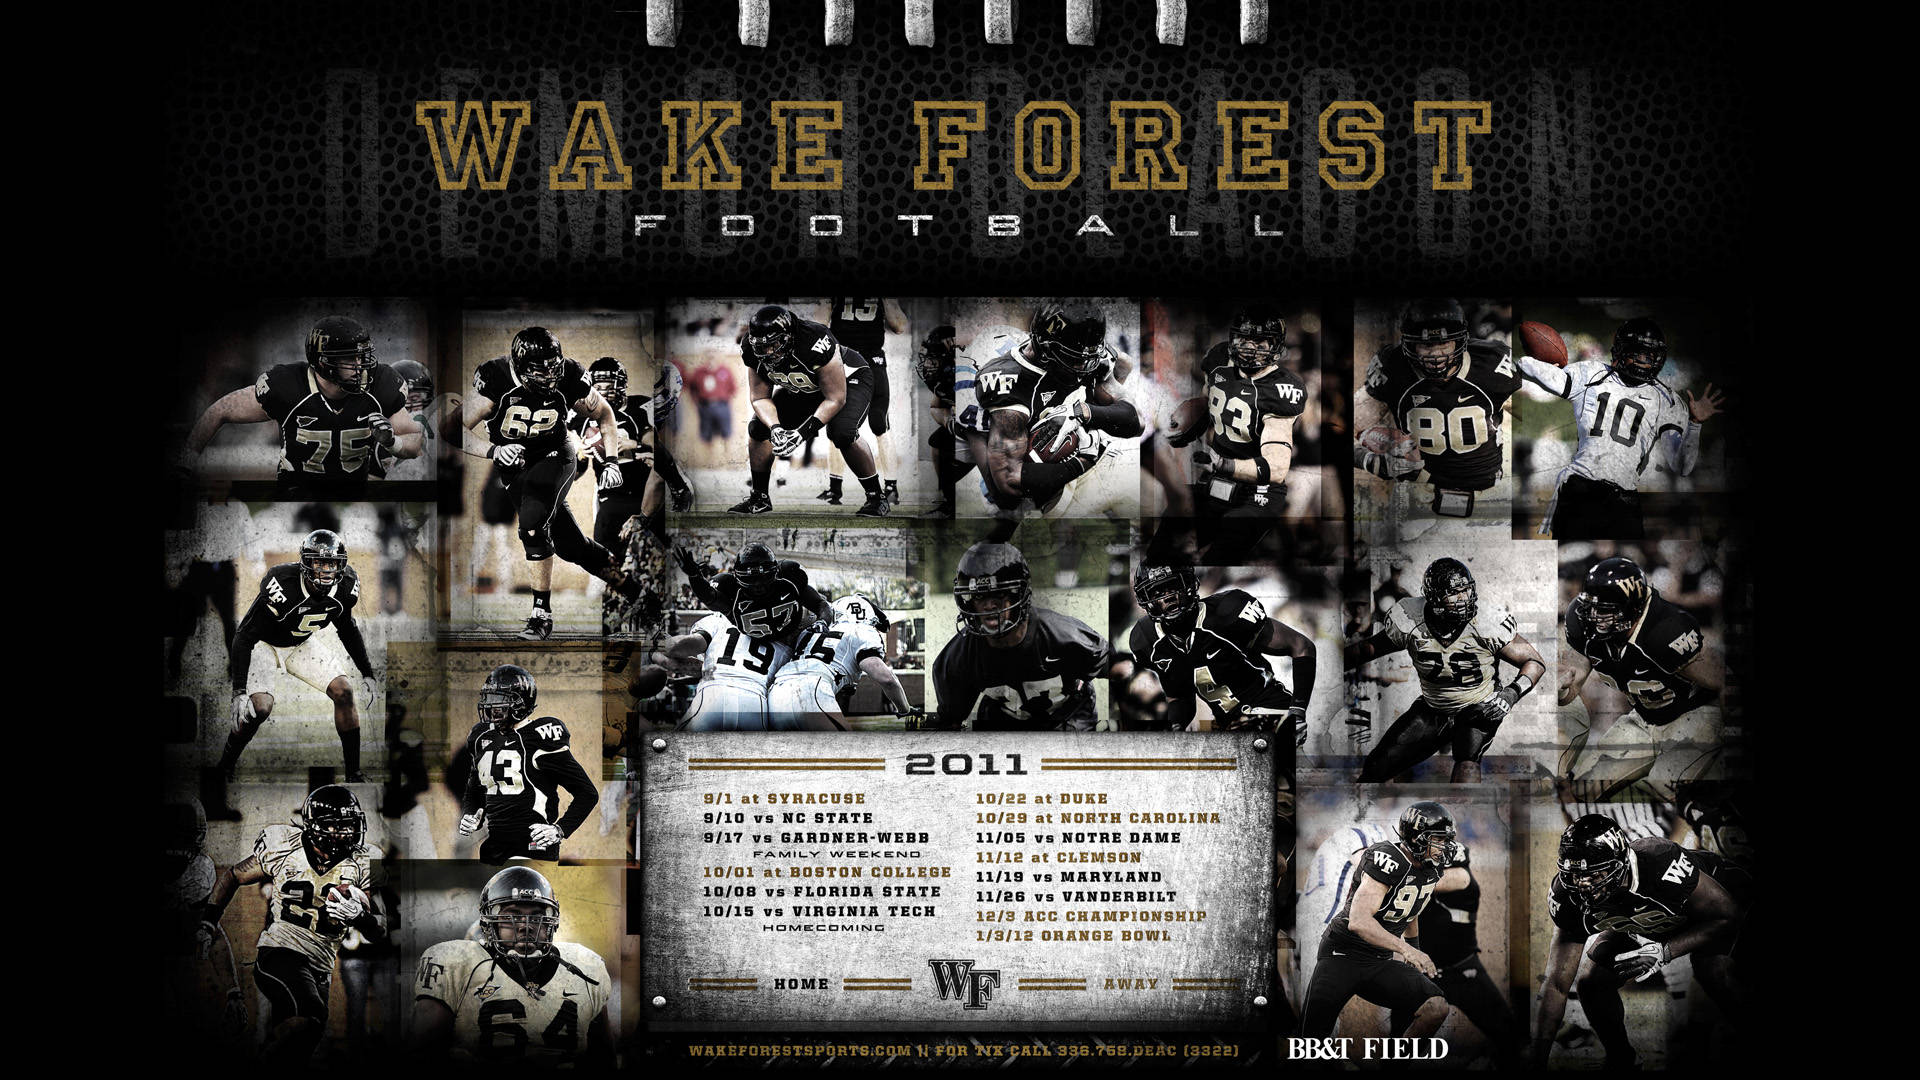 "Exciting Football Game at Wake Forest University" Wallpaper